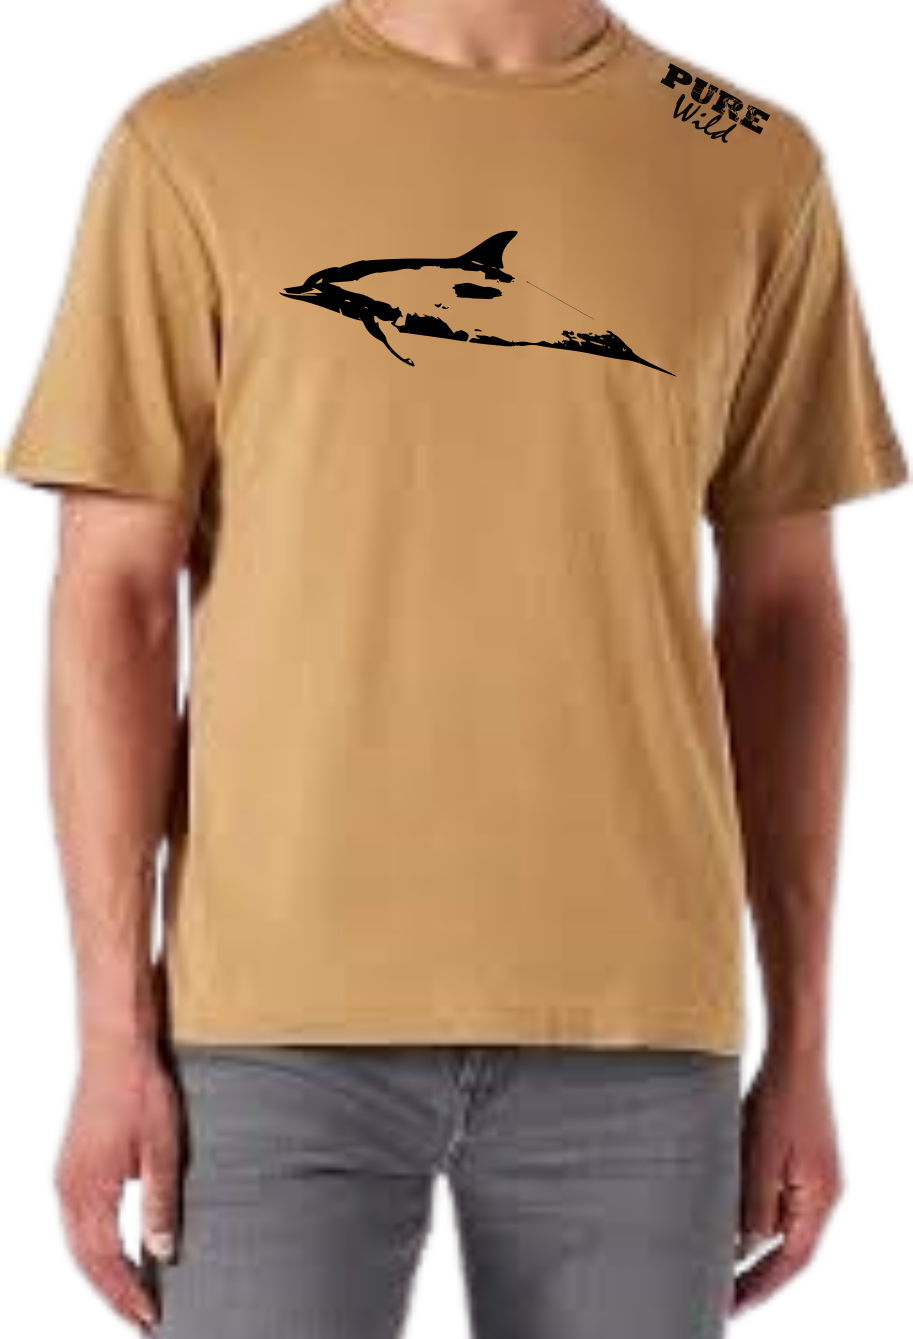 Dolphin T-Shirt For A Real Man